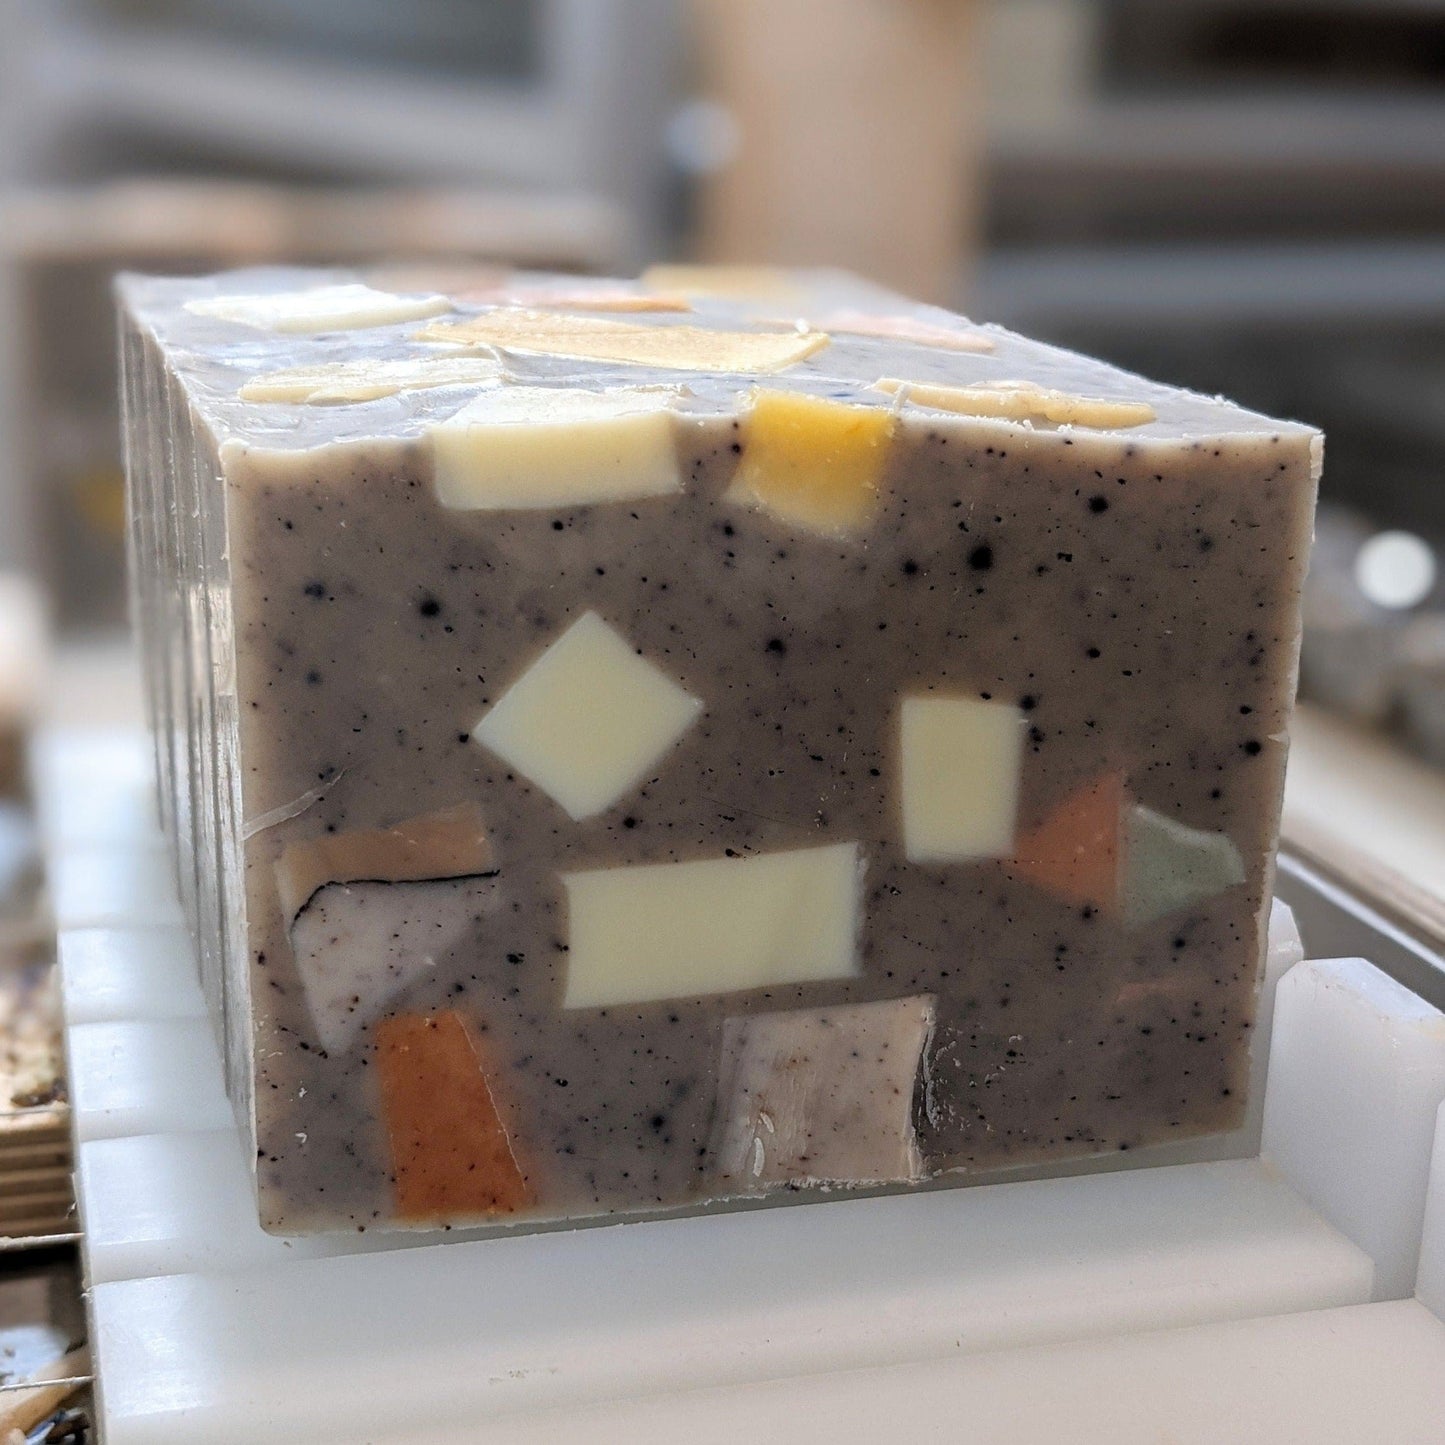 Natural Soap | MOSAIC - Terrazzo Soap with Lavender, Eucalyptus & Pine